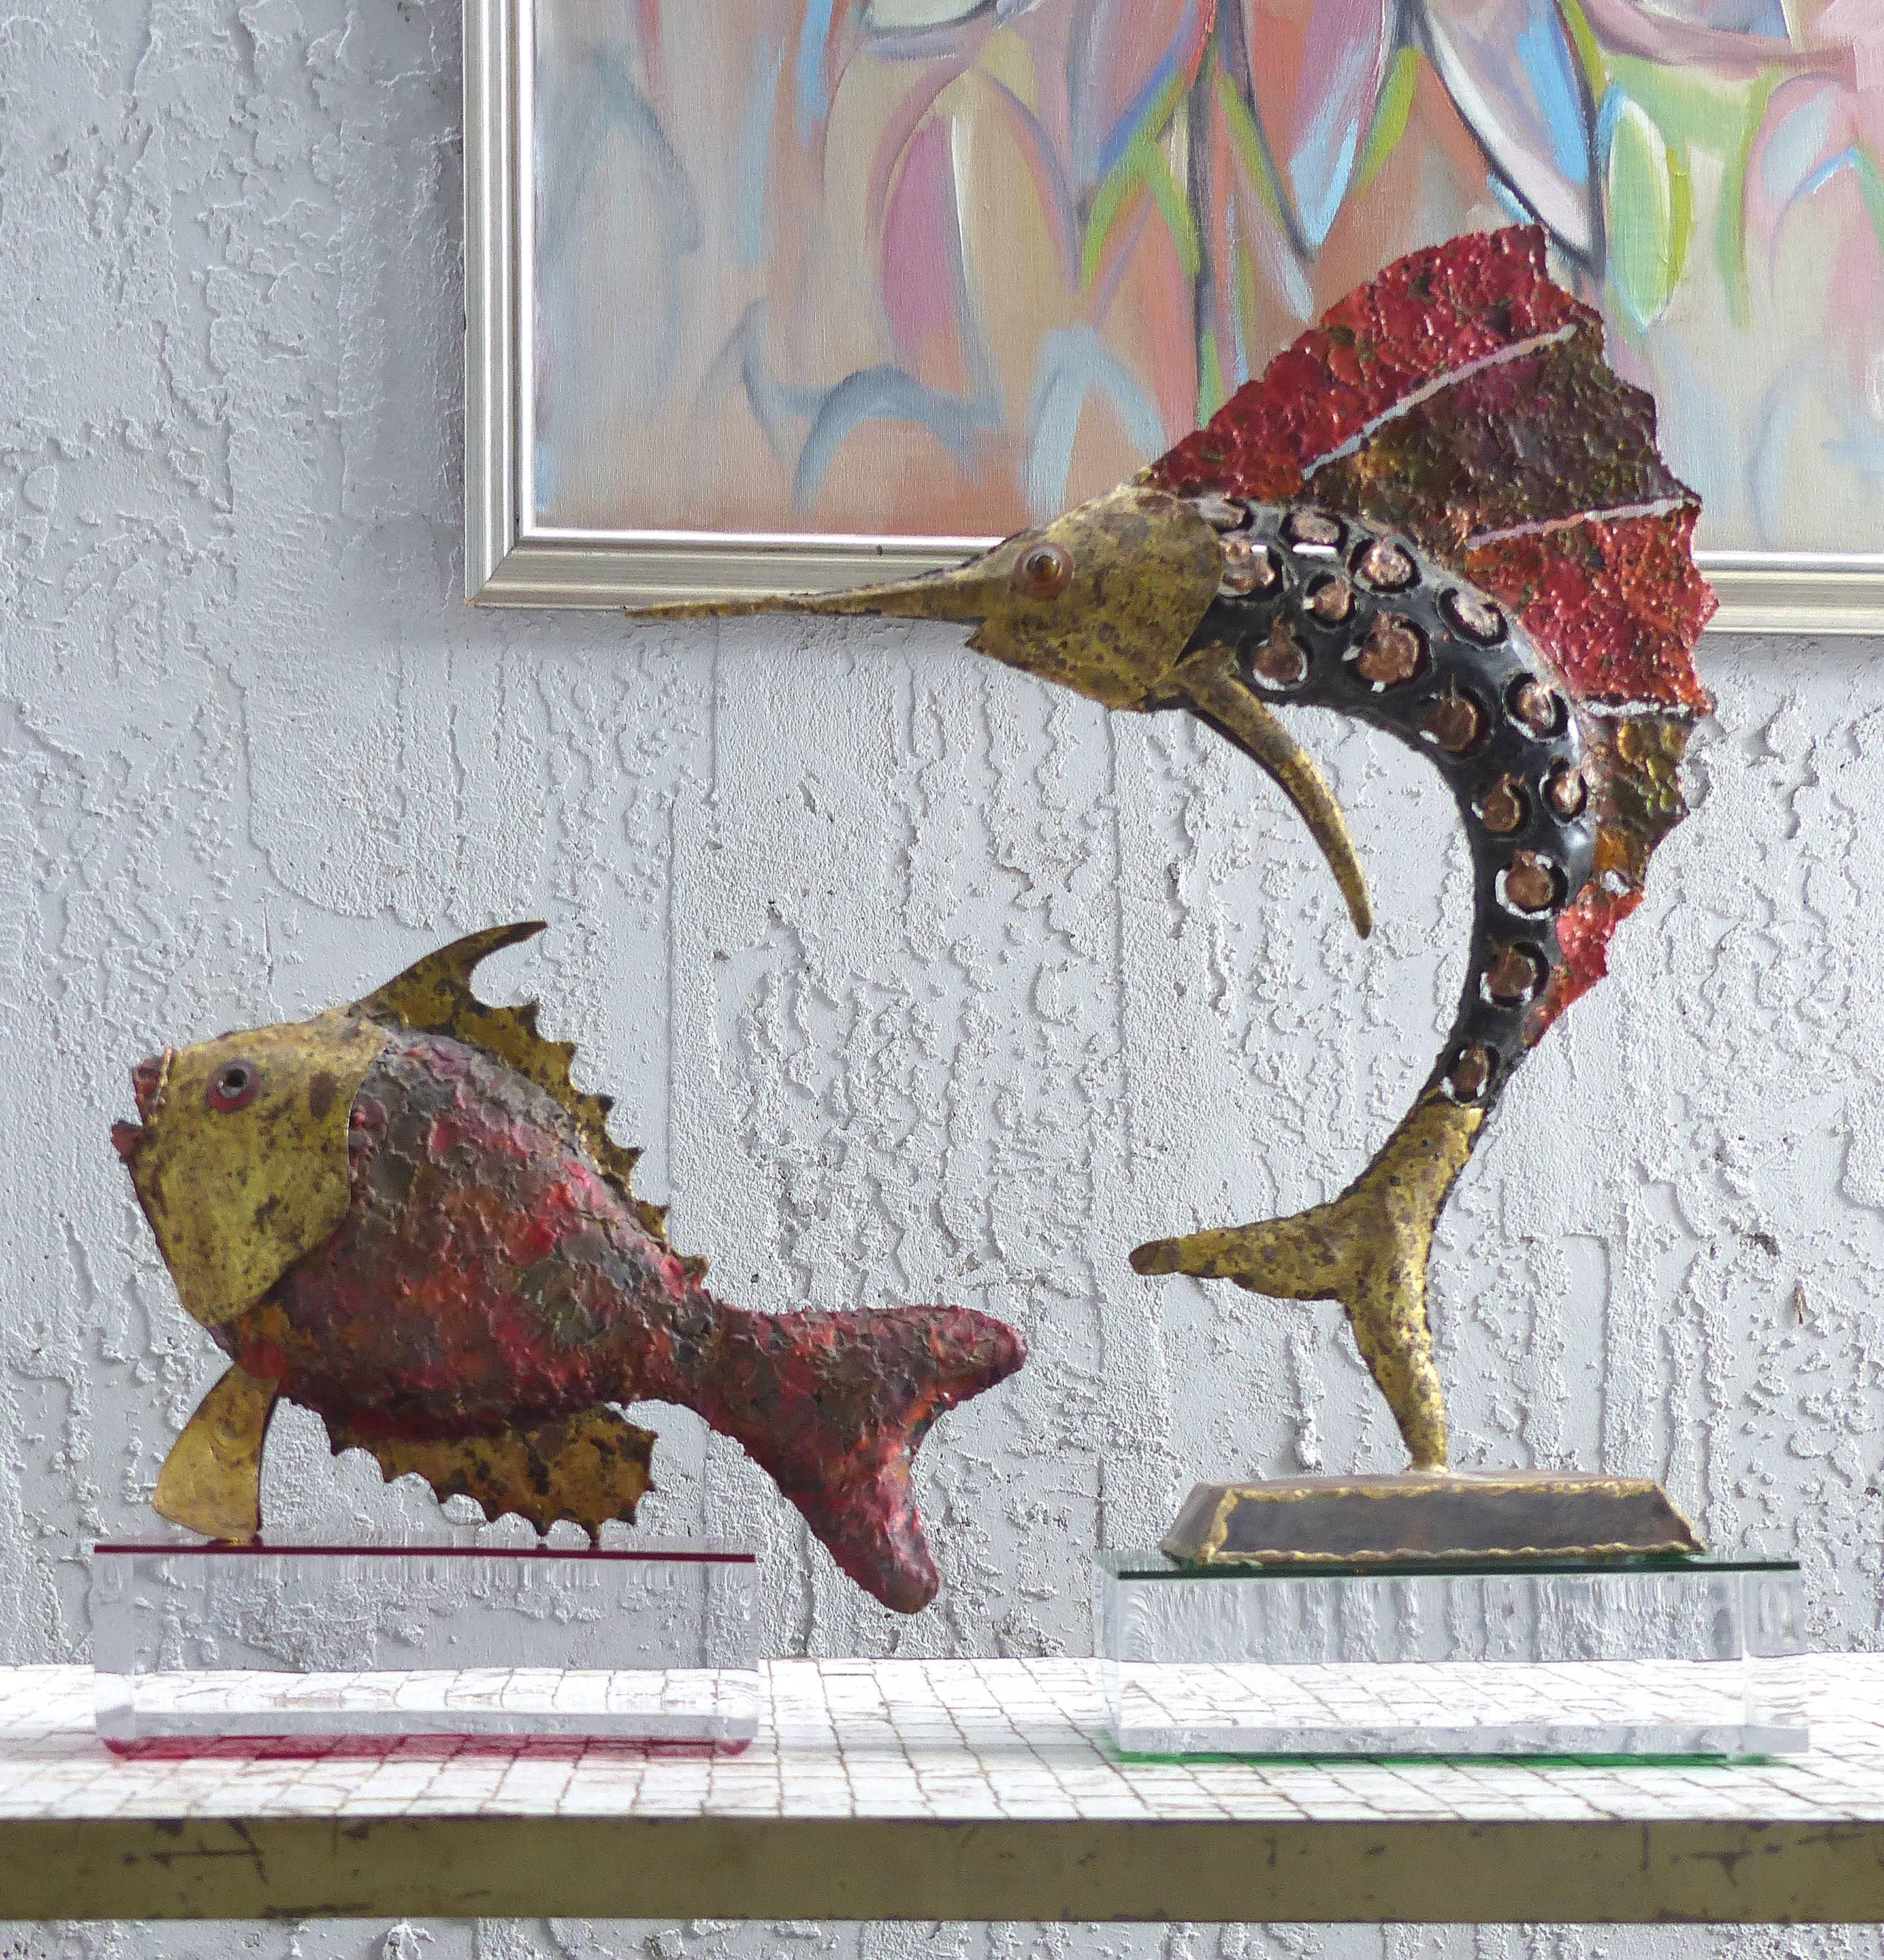 1970s Brutalist Torch-Cut Brass Sailfish and Fish Sculptures

Offered for sale is a set of two circa 1970s torched metal Brutalist sculptures of fish with great patinated coloring and textures. The sailfish is dancing on his tail supported upon a